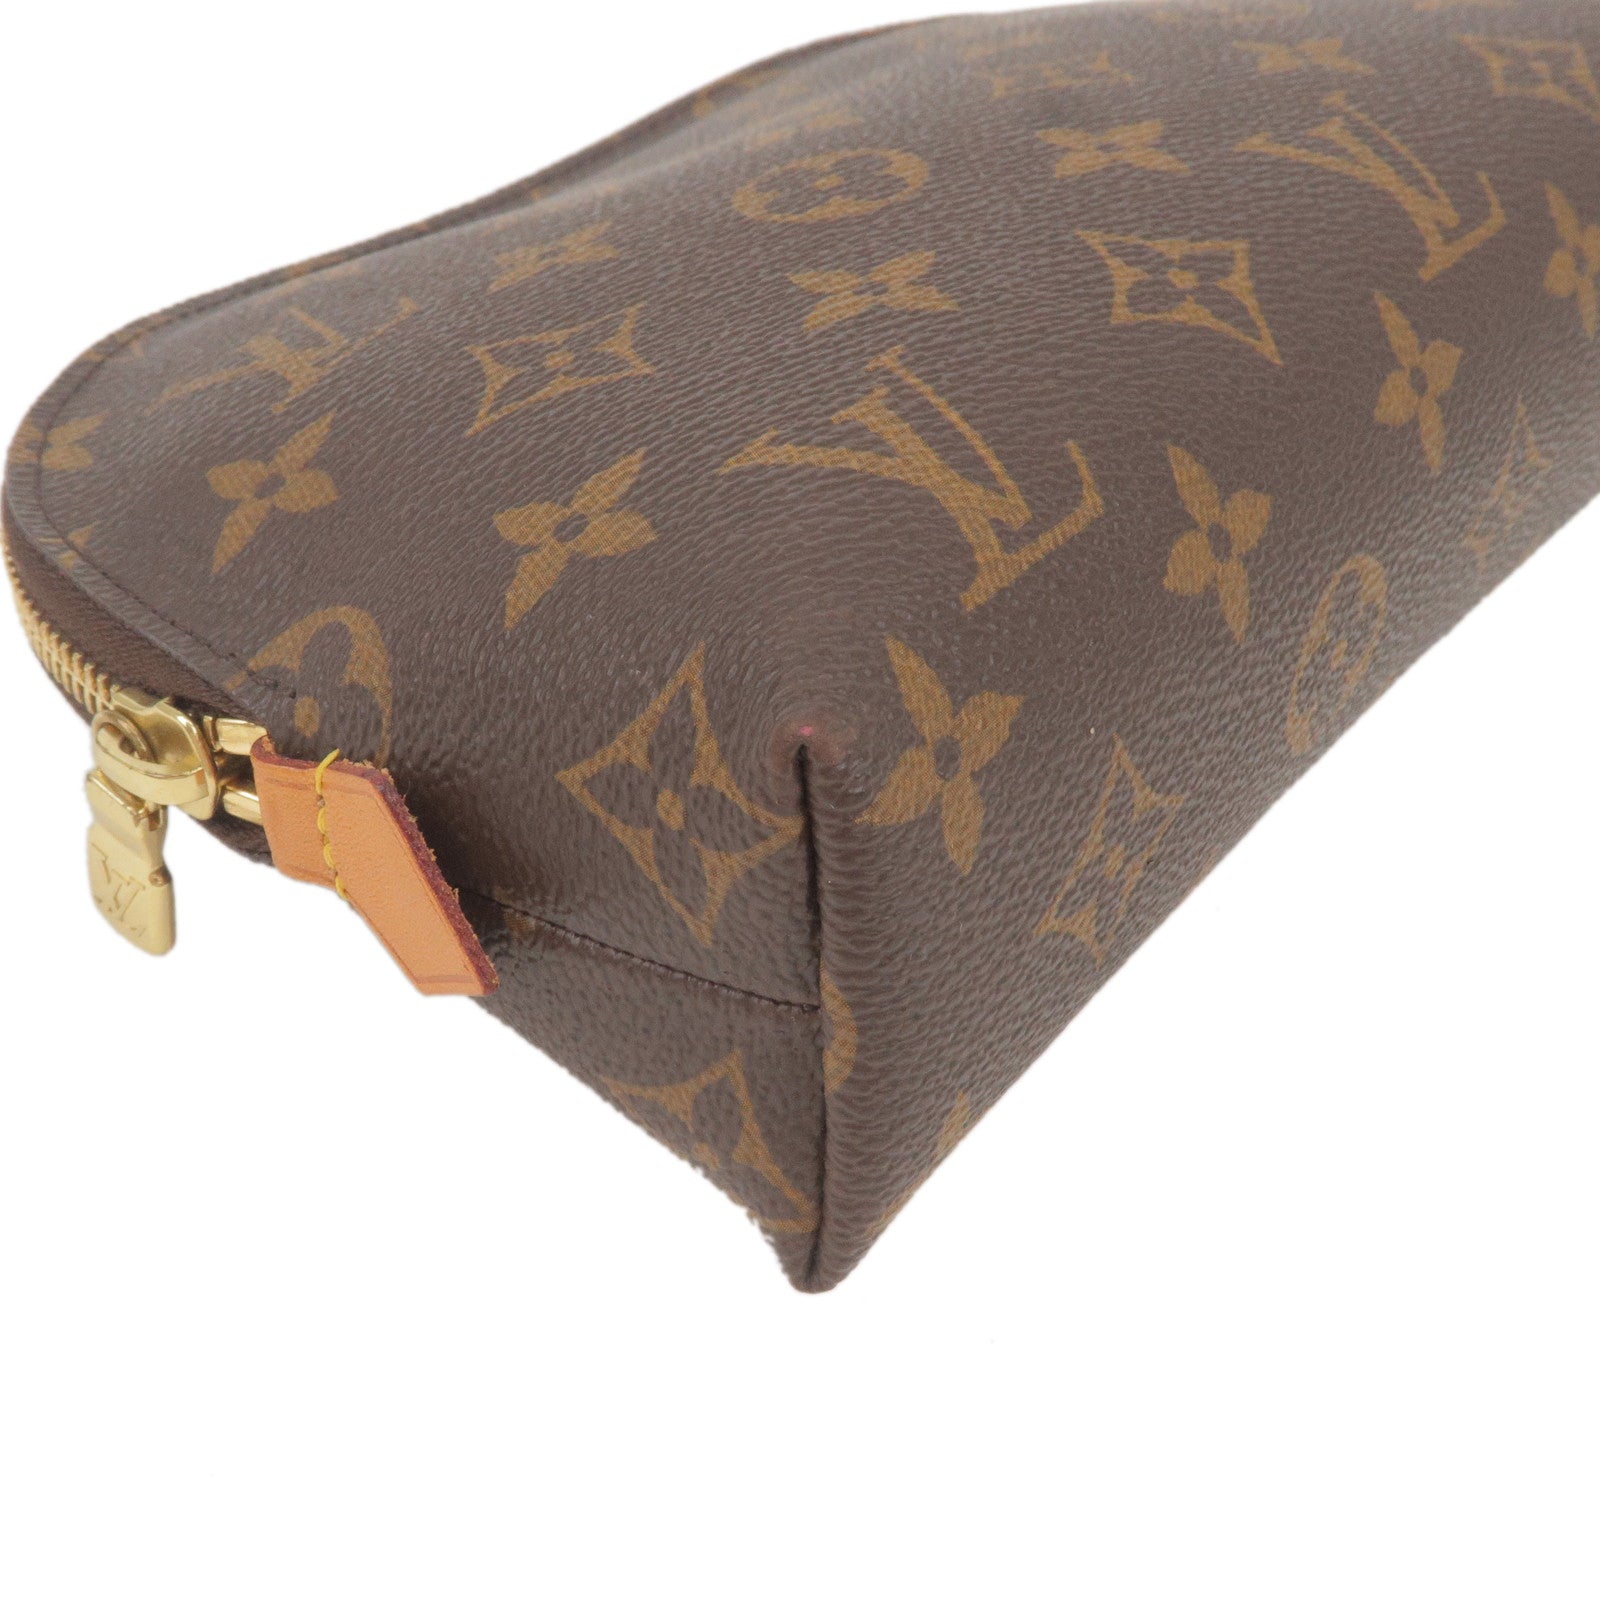 Louis Vuitton - Cosmetic PMPouch - Brown - Women - Luxury